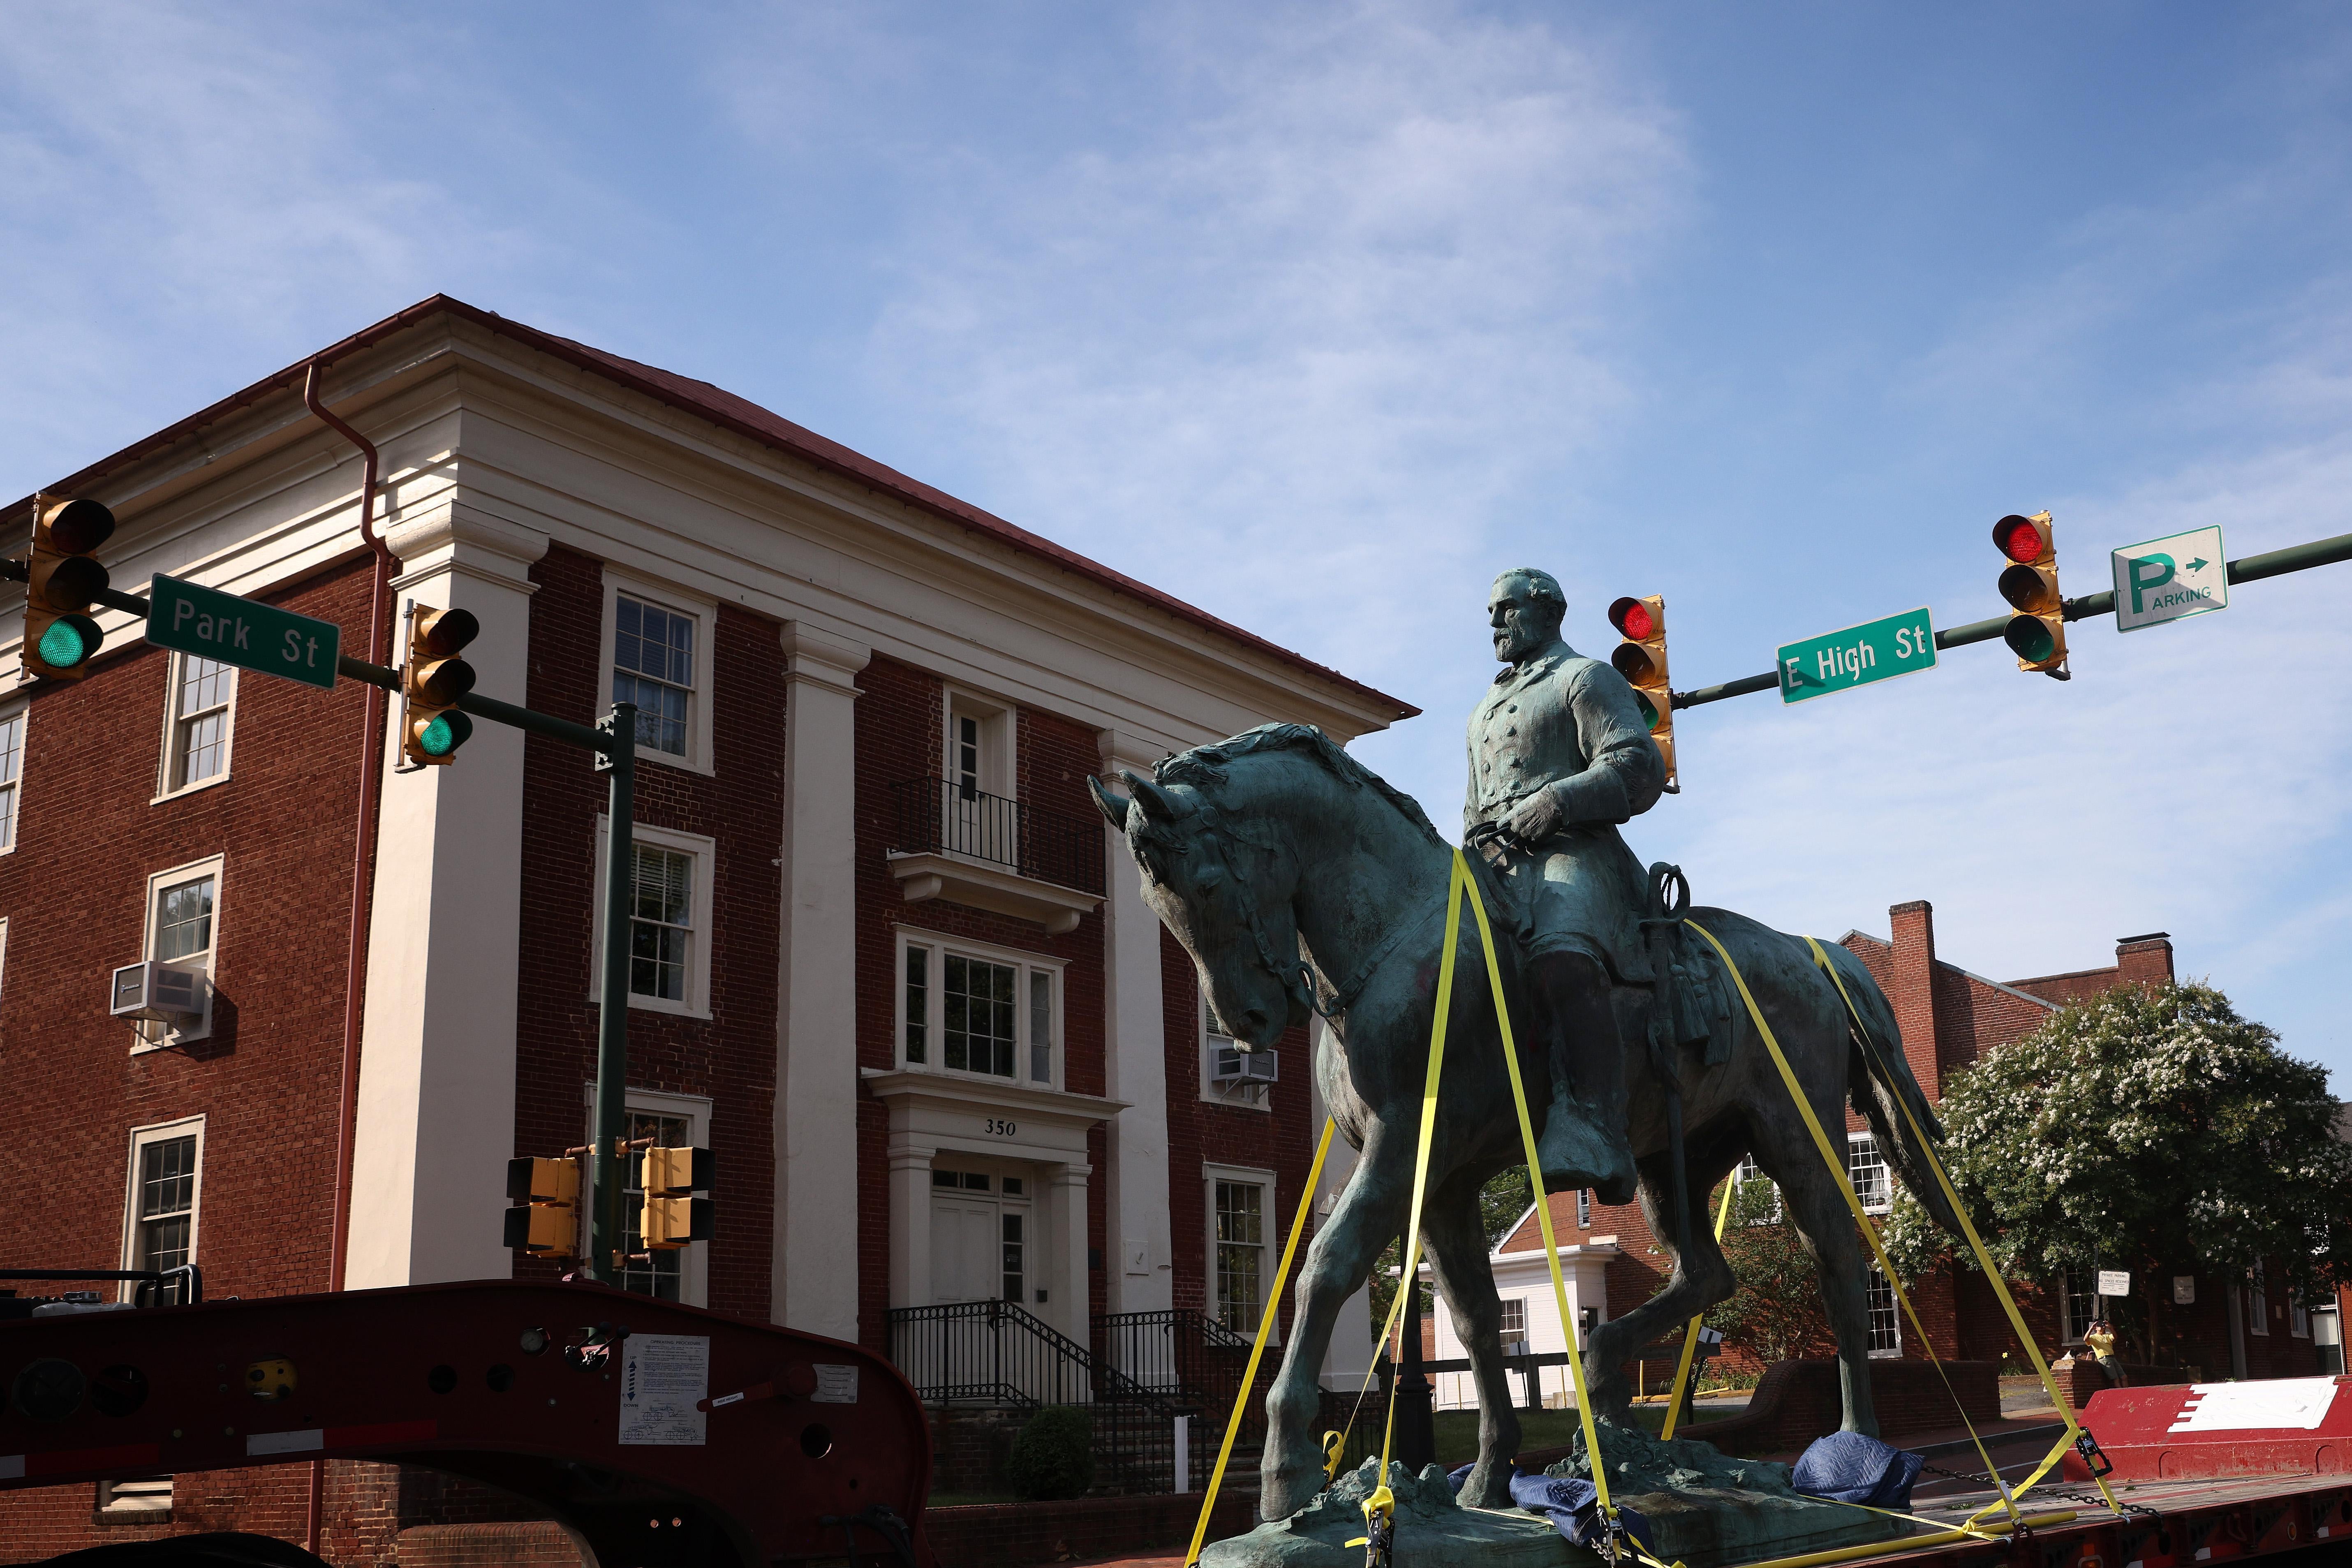 A flatbed truck carries a statue of Confederate General Robert E. Lee from the Market Street Park July 10, 2021 in Charlottesville, Virginia. 